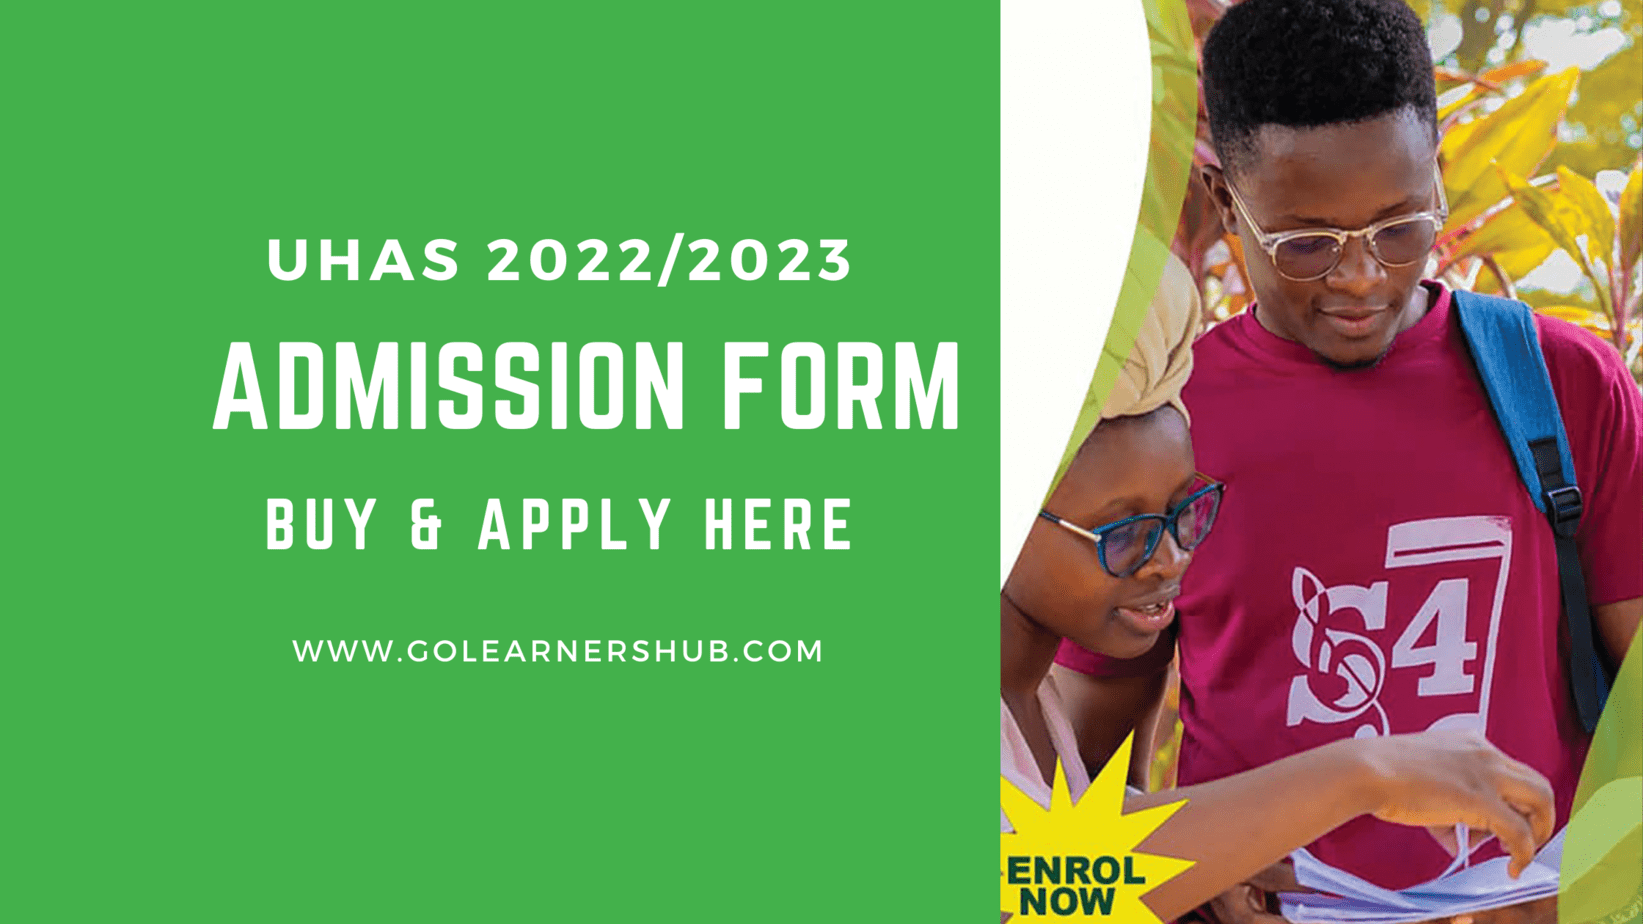 UHAS 2022:2023 Admission Form Out - Buy & Apply Here